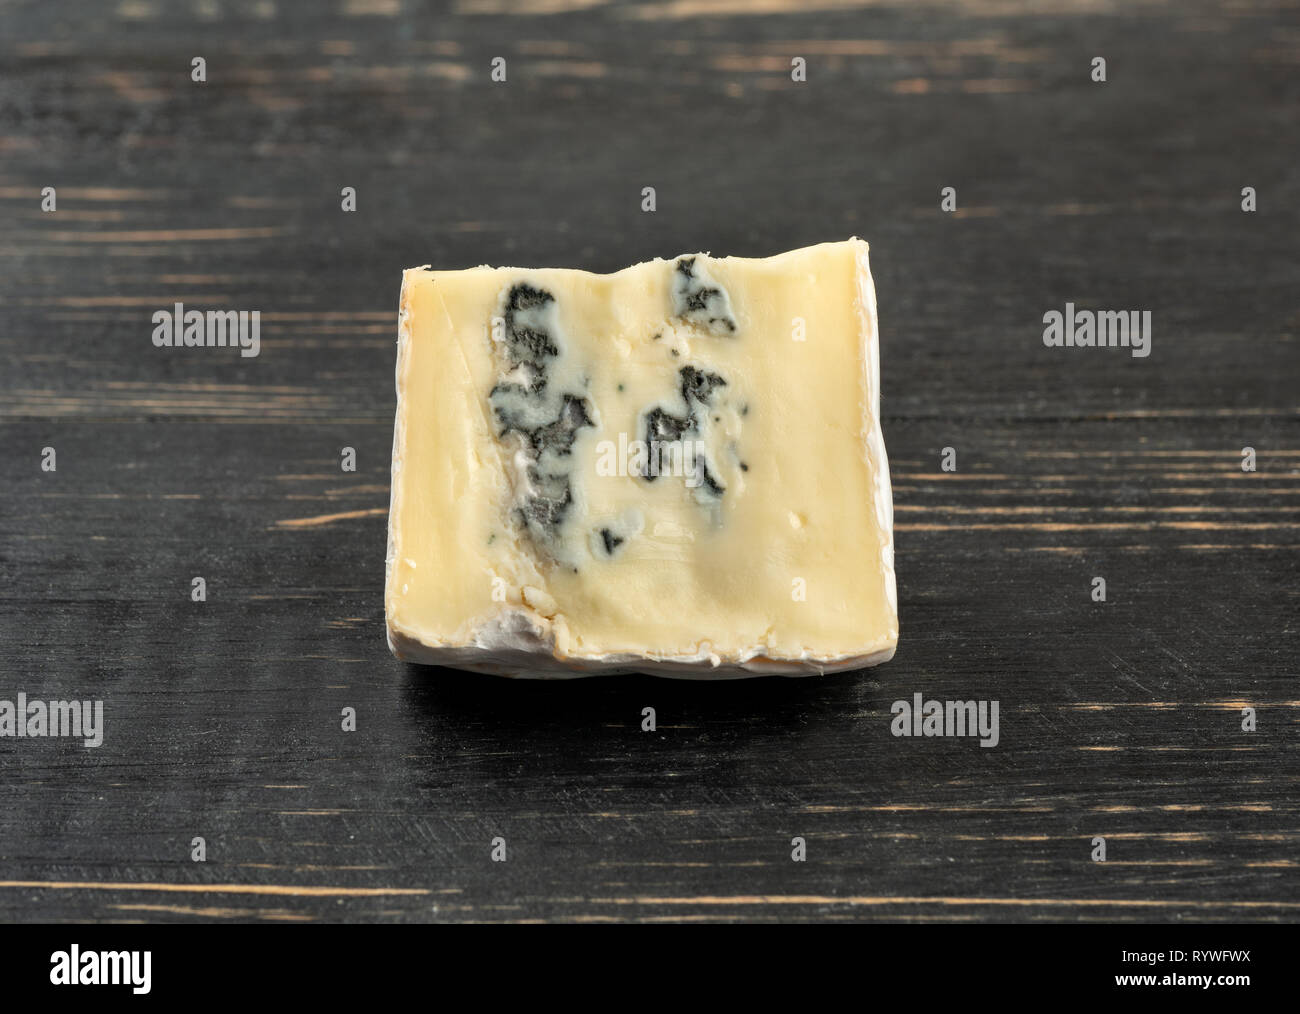 Slice of brie cheese with mold on a dark table Stock Photo